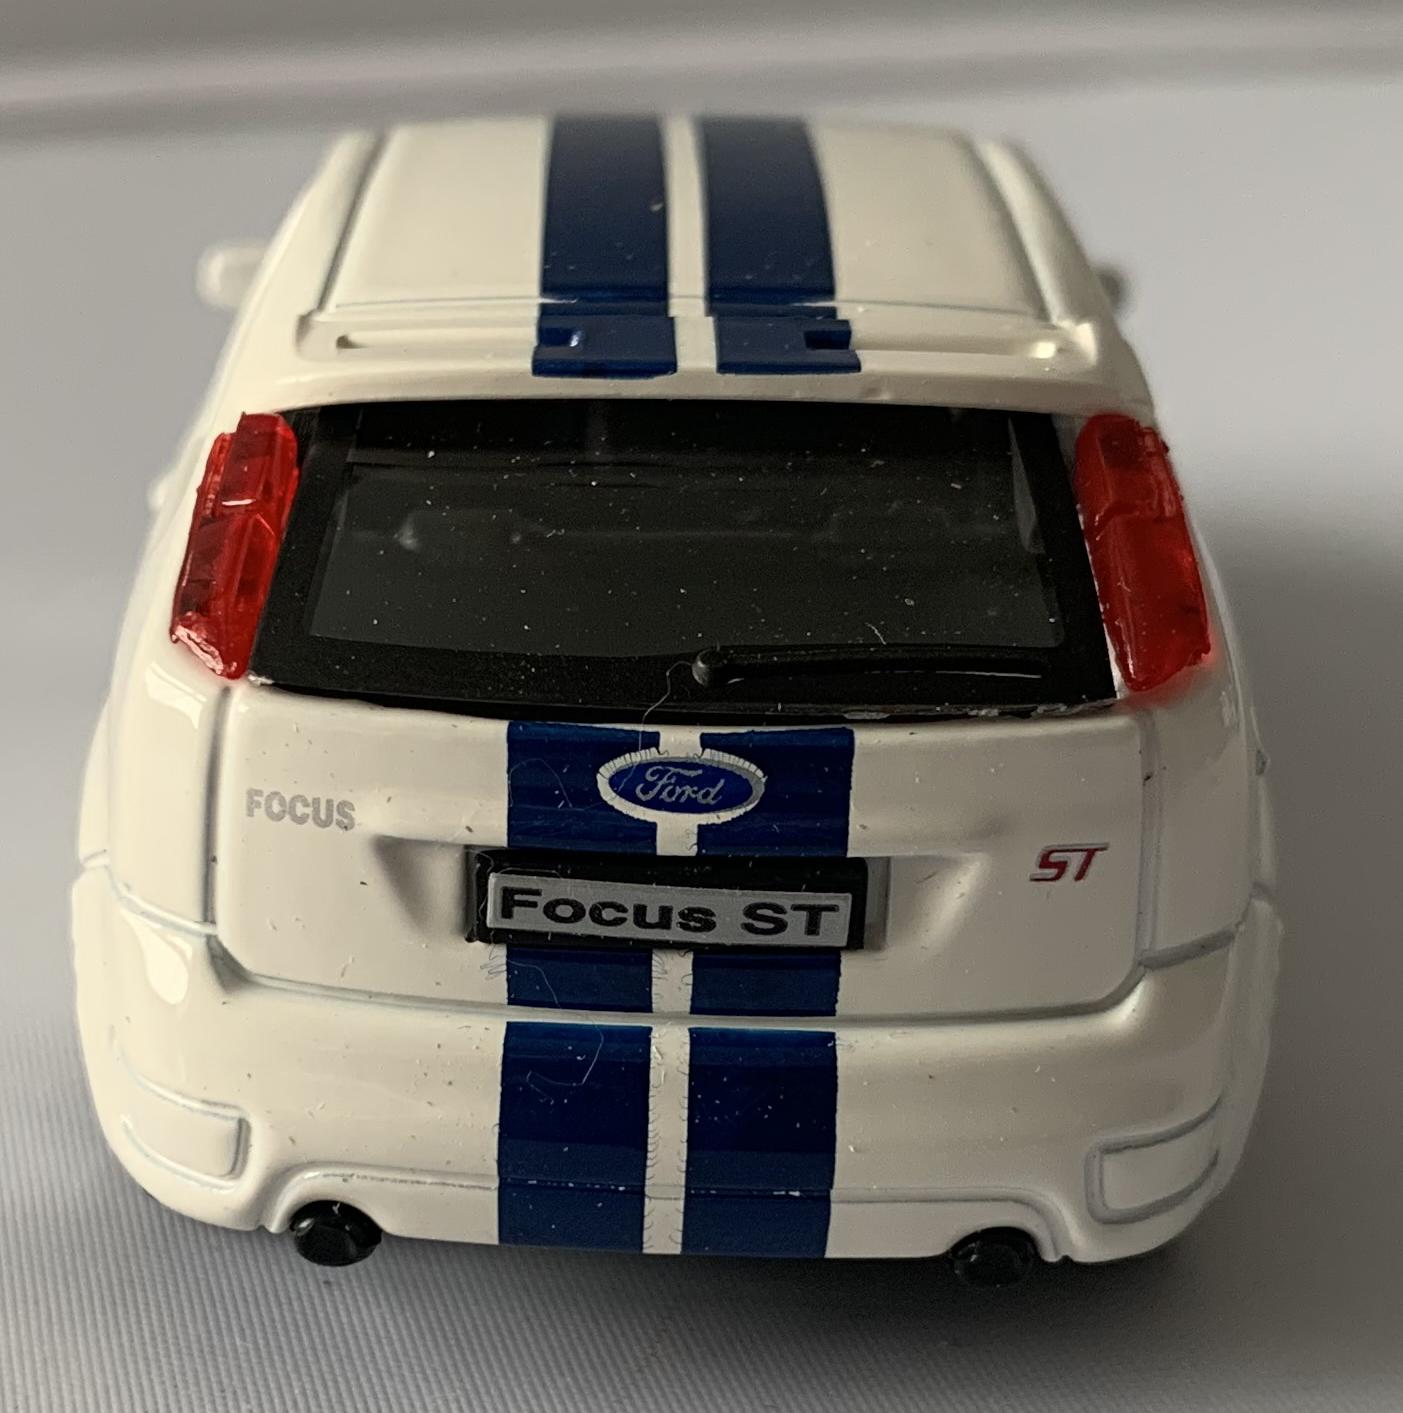 Ford Focus ST in white 1:43 scale diecast model from Bburago, streetfire